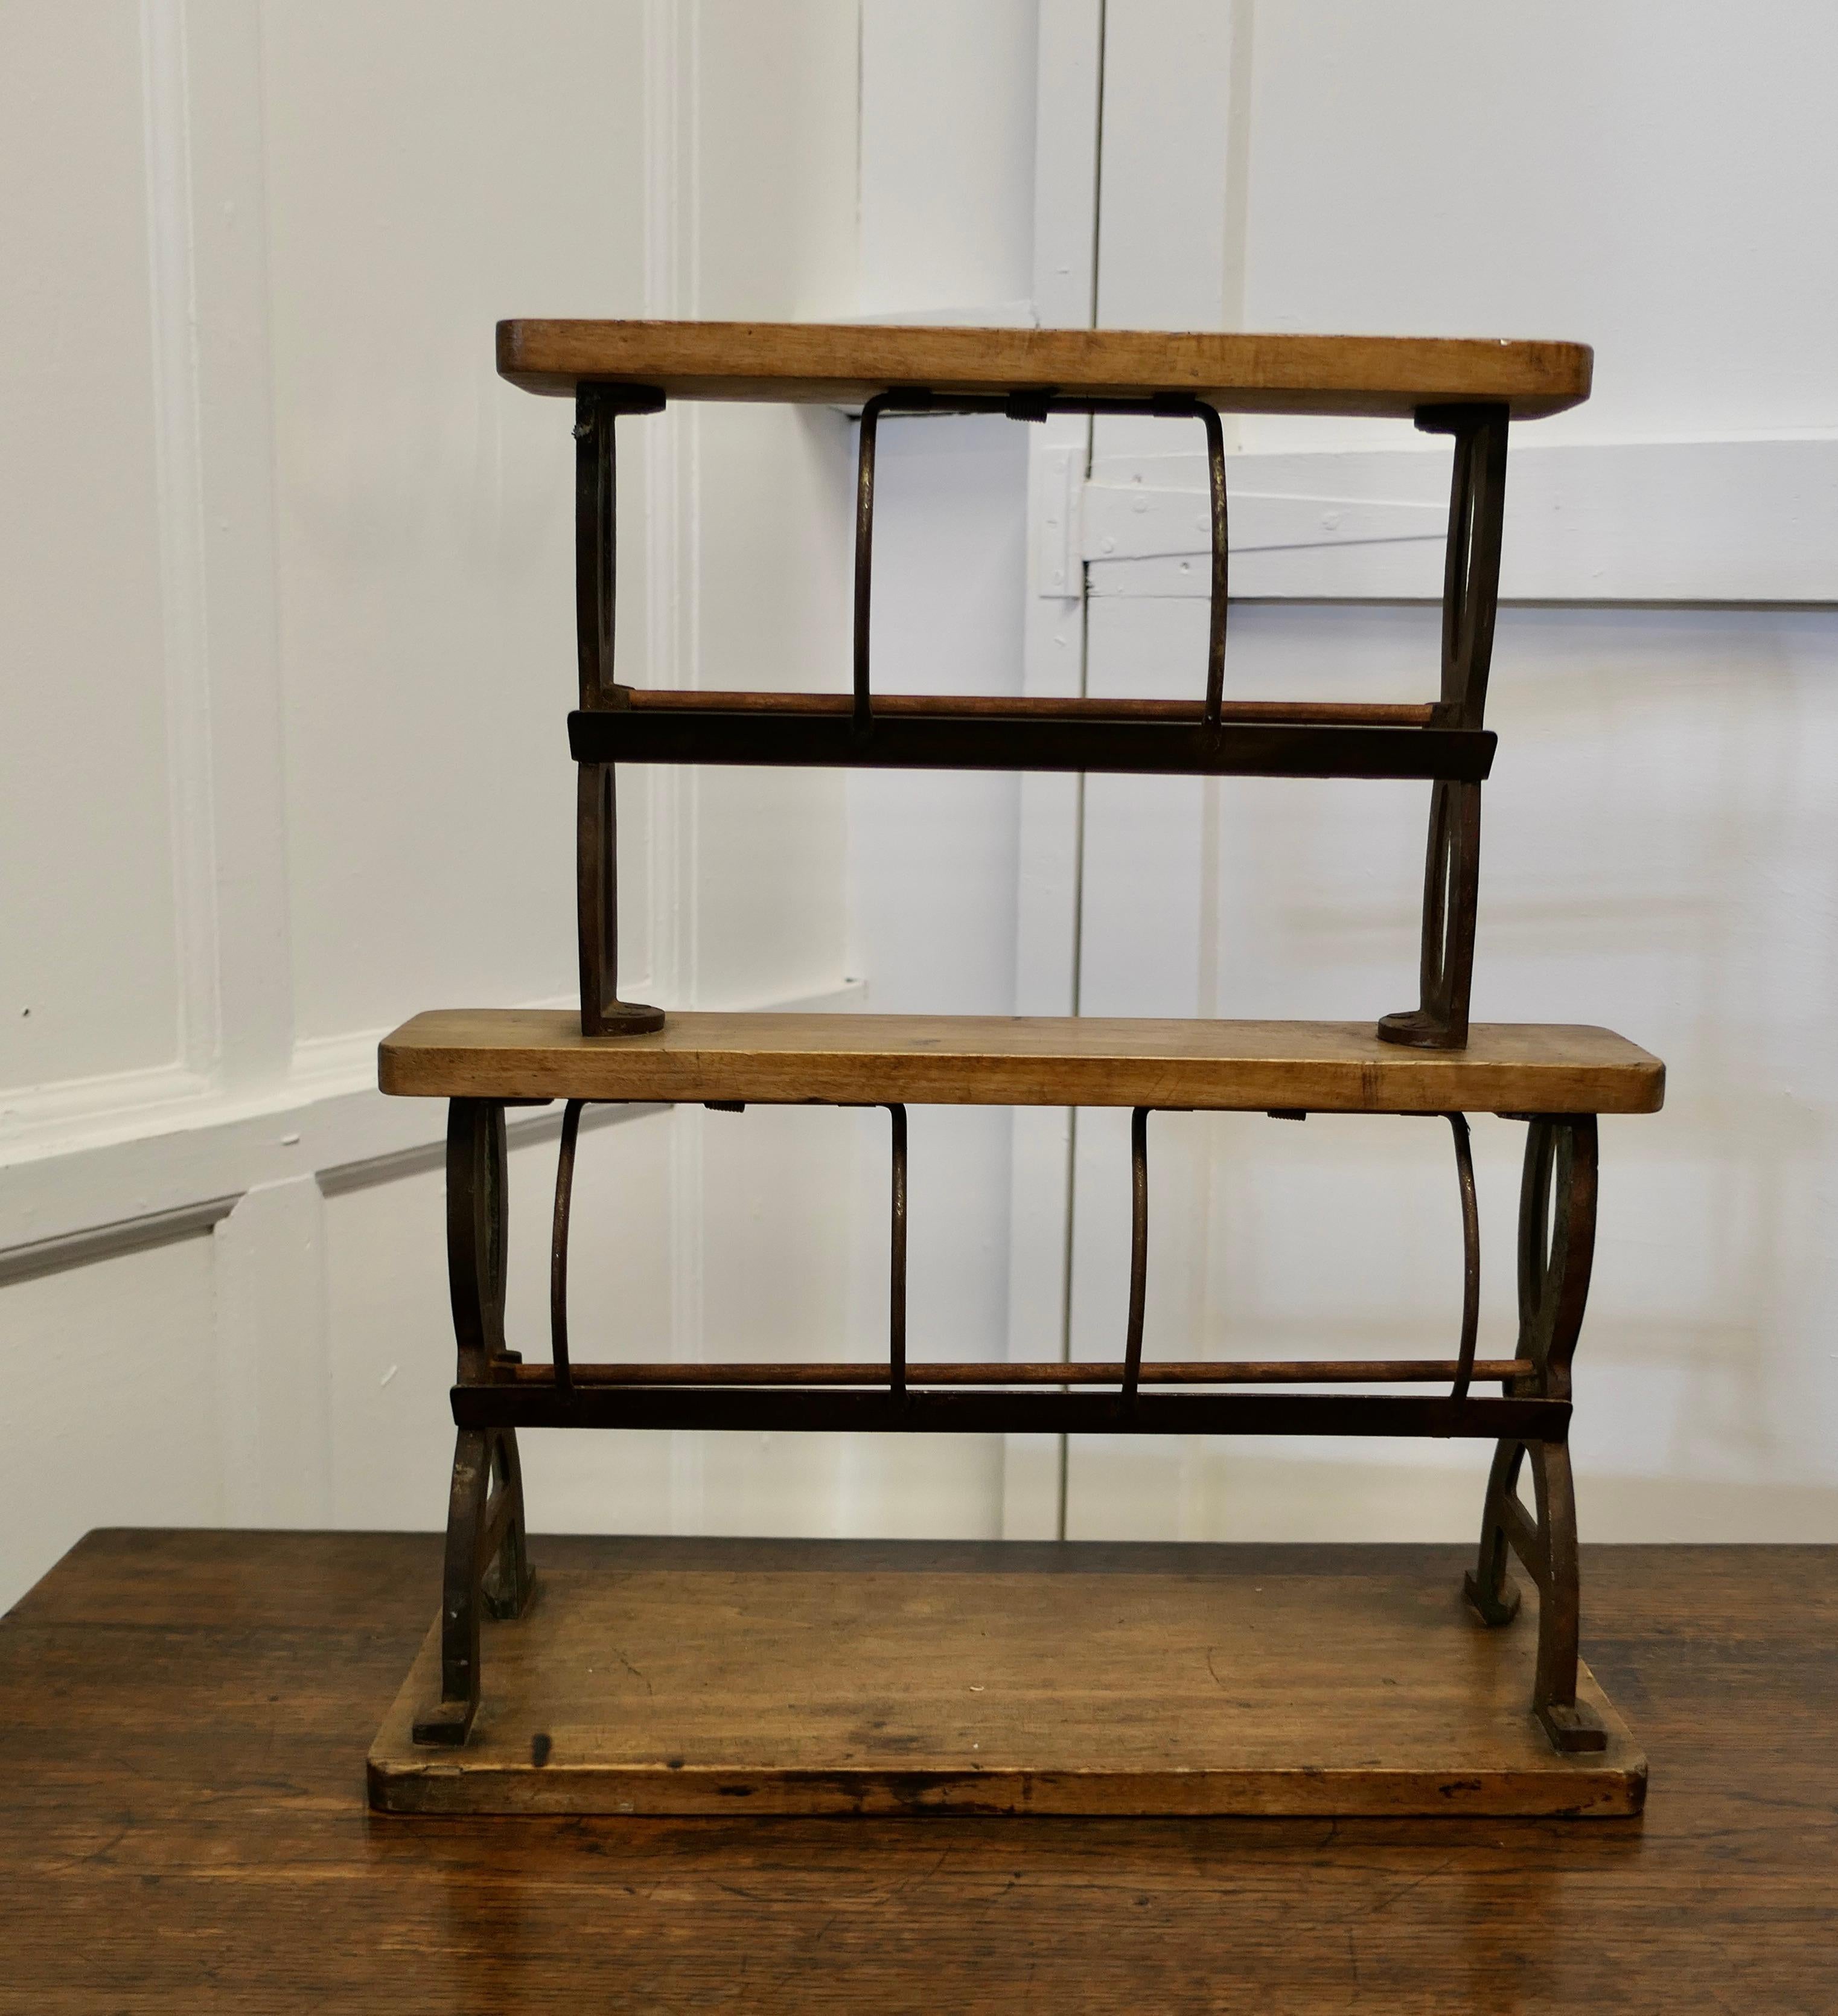 19th century shop double paper roll cutter dispenser

This is a rare and very unusual paper roll cutter, the stand is made in Beech and Iron, it holds 2 rolls of paper, the roll holders are set behind a heavy serrated cutting edge, so that when